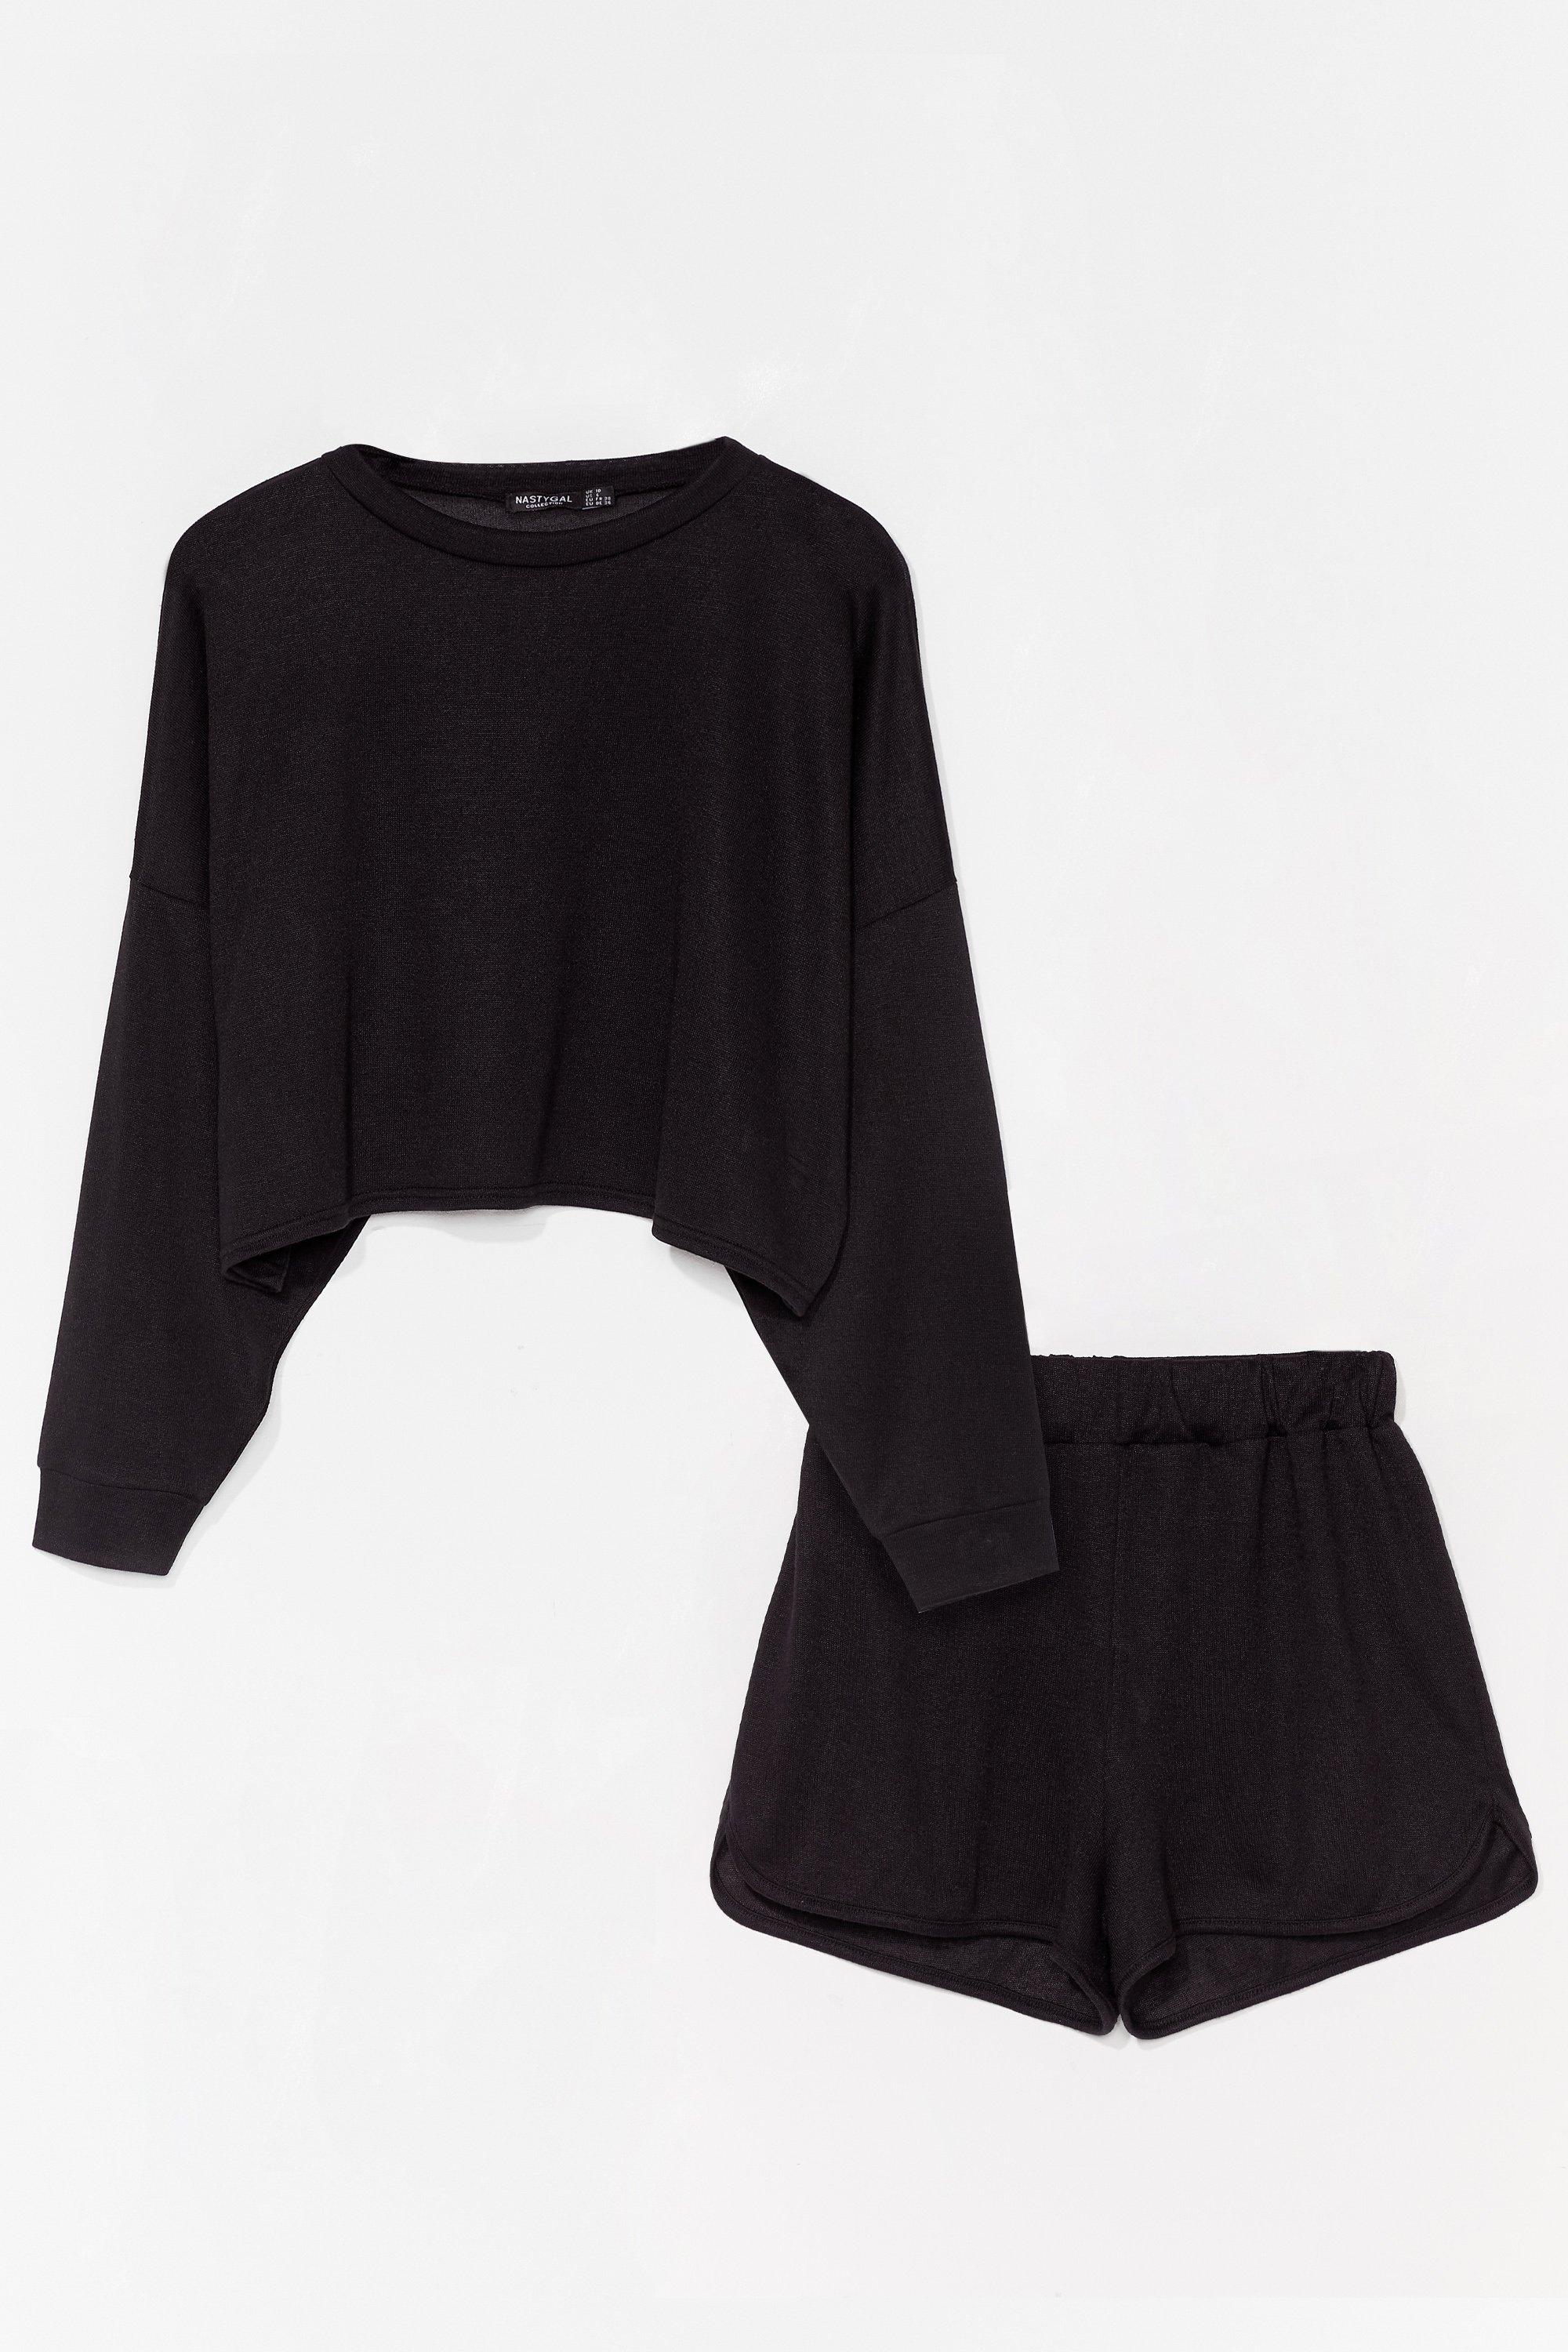 Runner Your Mouth Sweater and Shorts Lounge Set | Nasty Gal